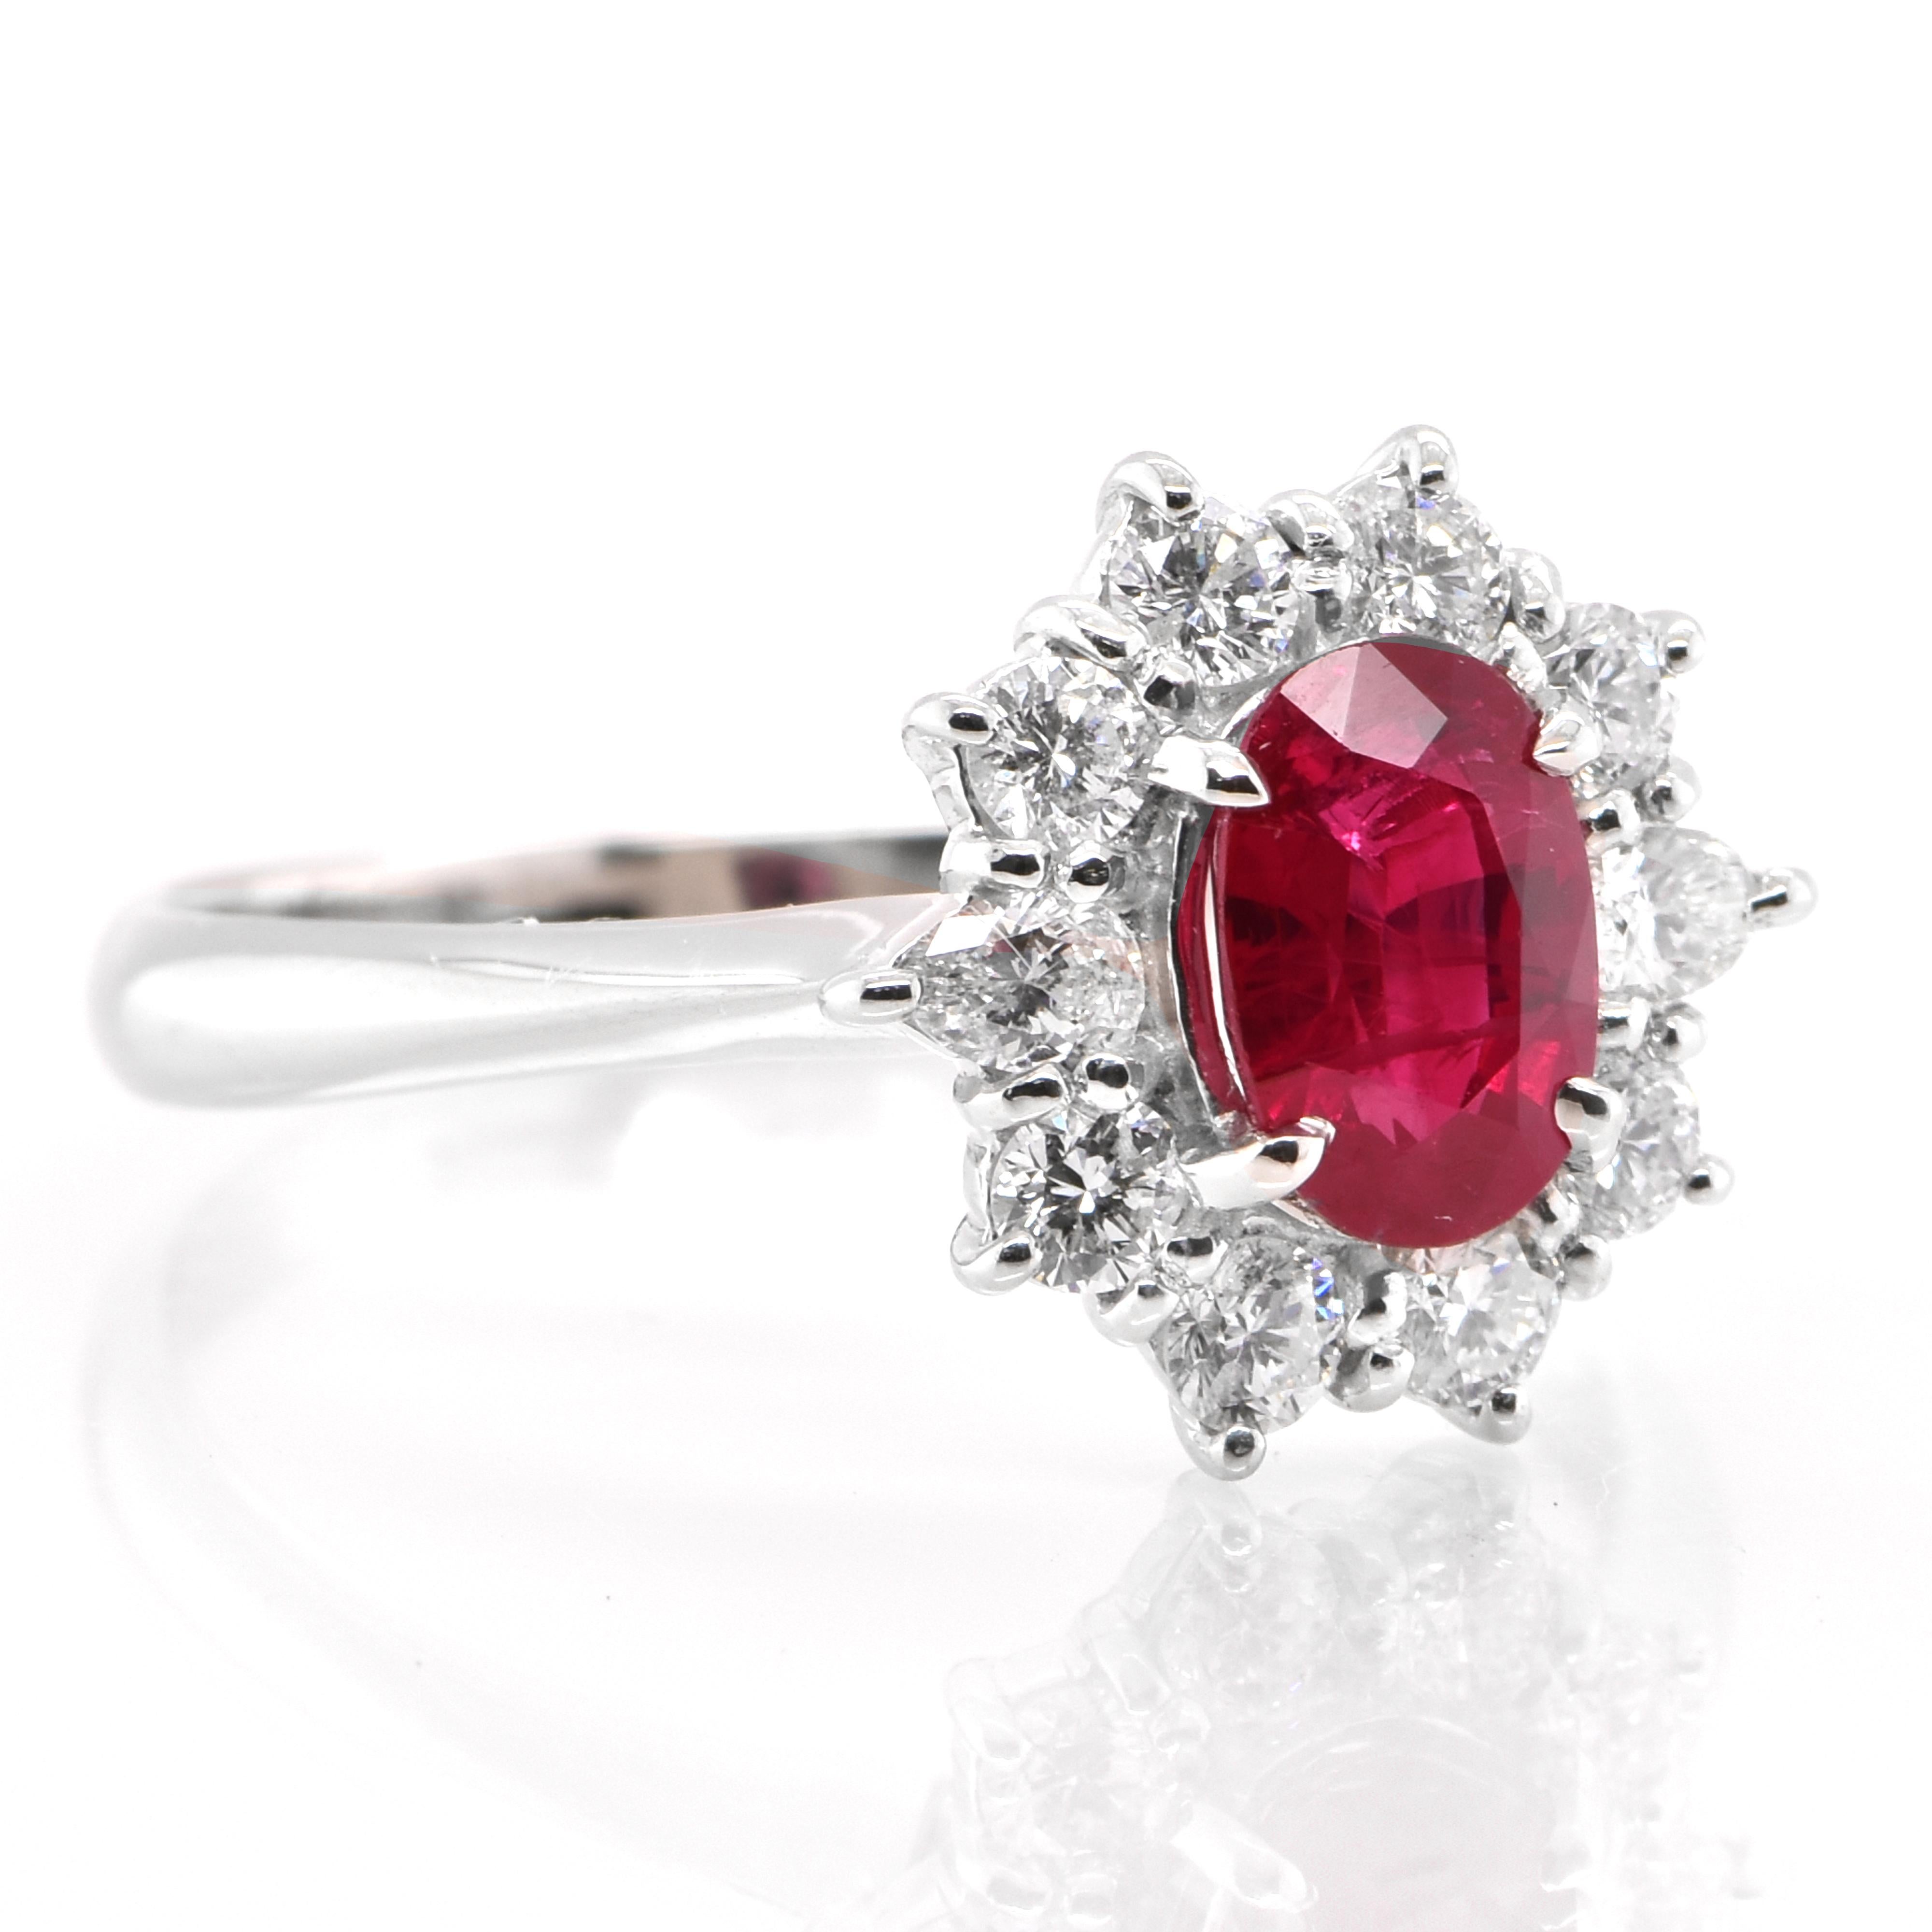 Modern 1.32 Carat Natural Ruby and Diamond Halo Engagement Ring Set in Platinum